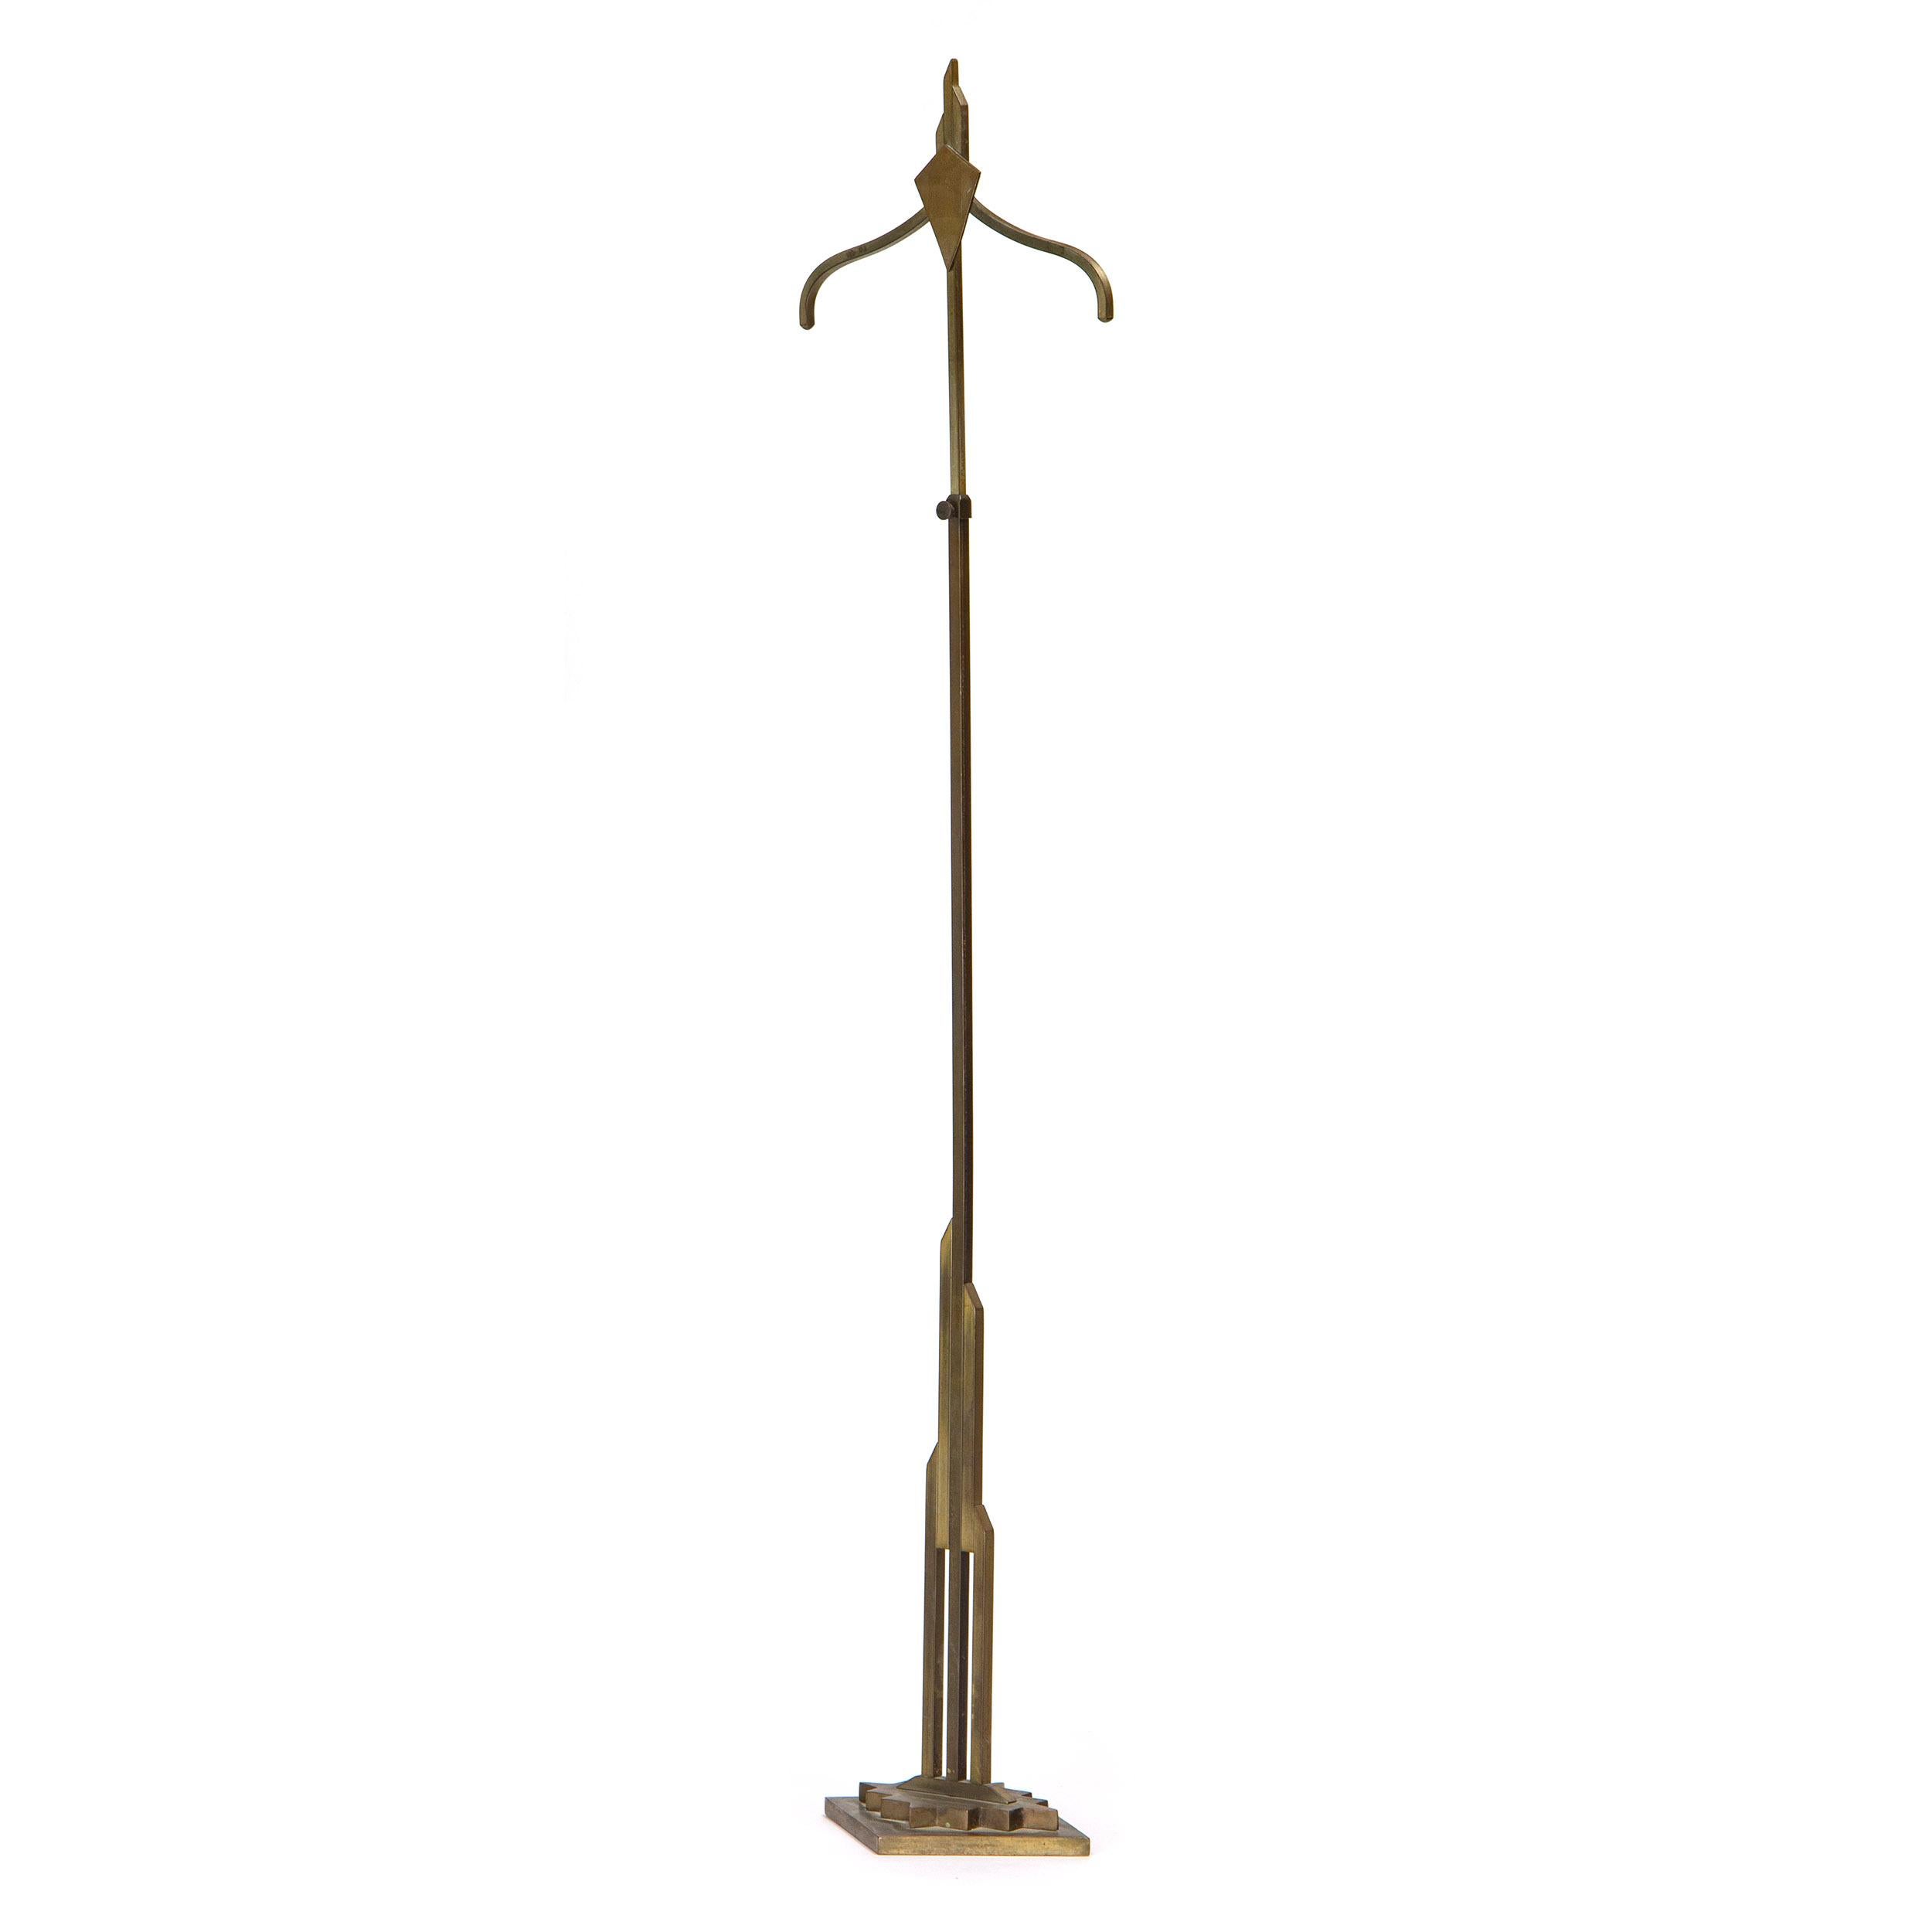 An Art Deco coat tree in brass for G. Fox and Co.